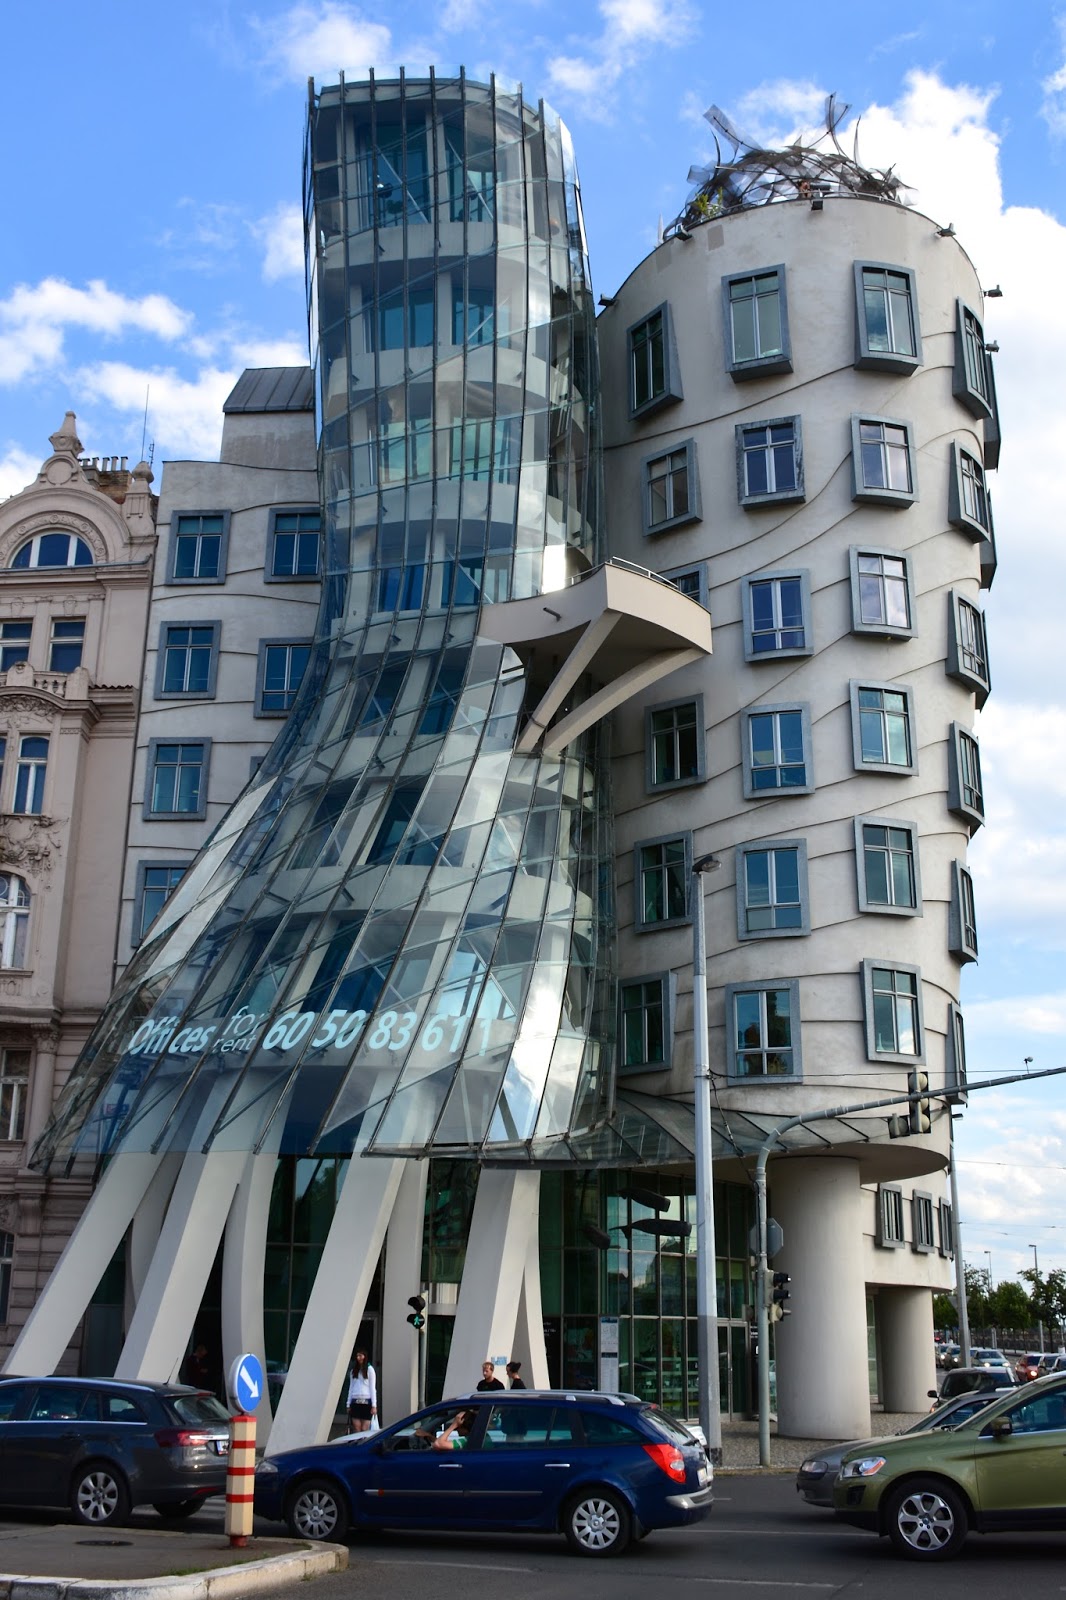 In the Dancing House, Ginger leans into Fred